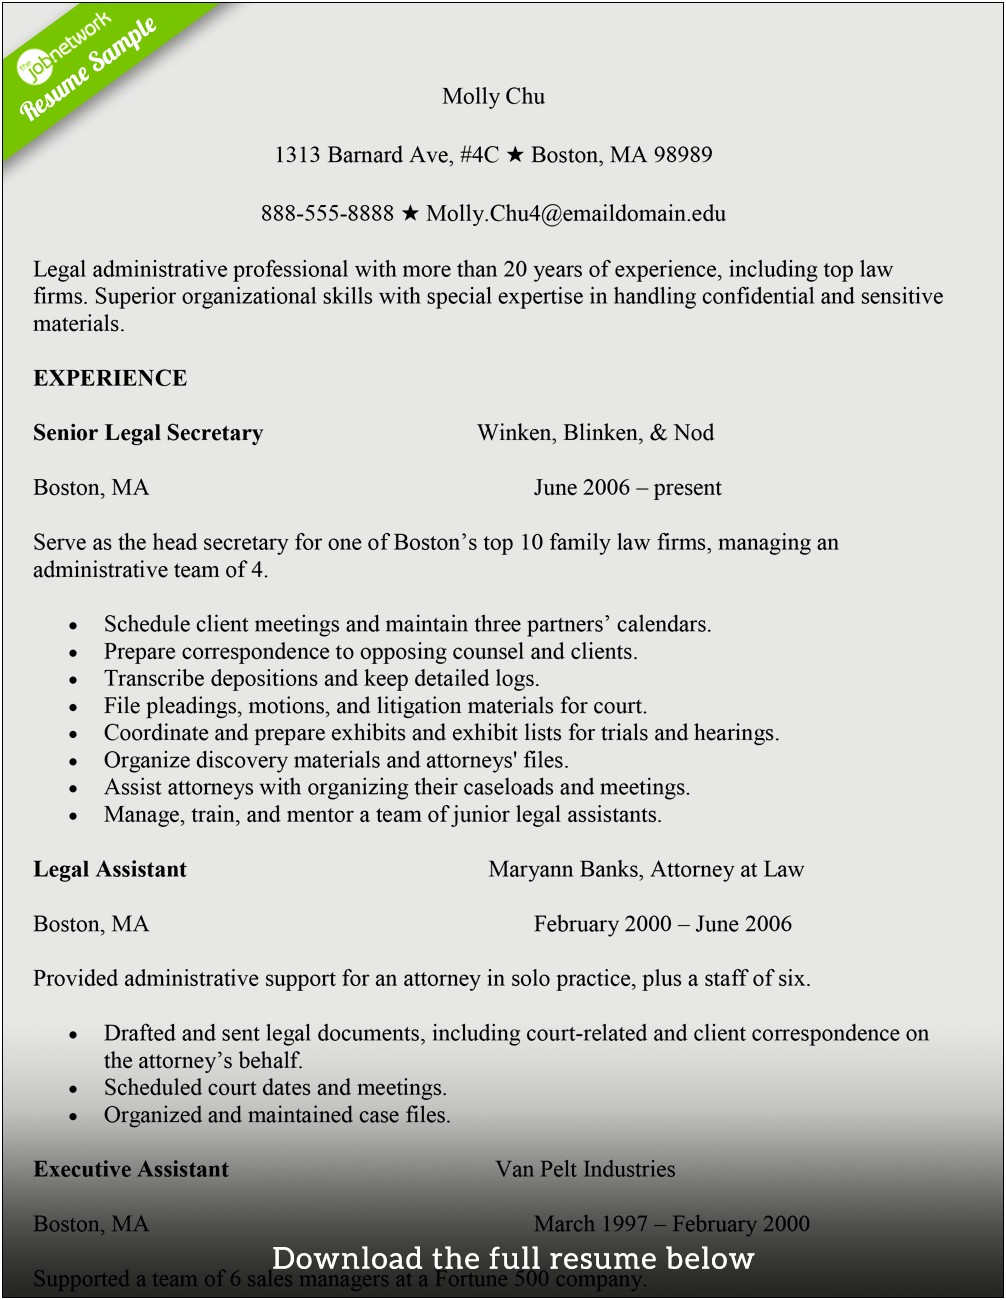 Administrative Assistant Resume Sample 2017